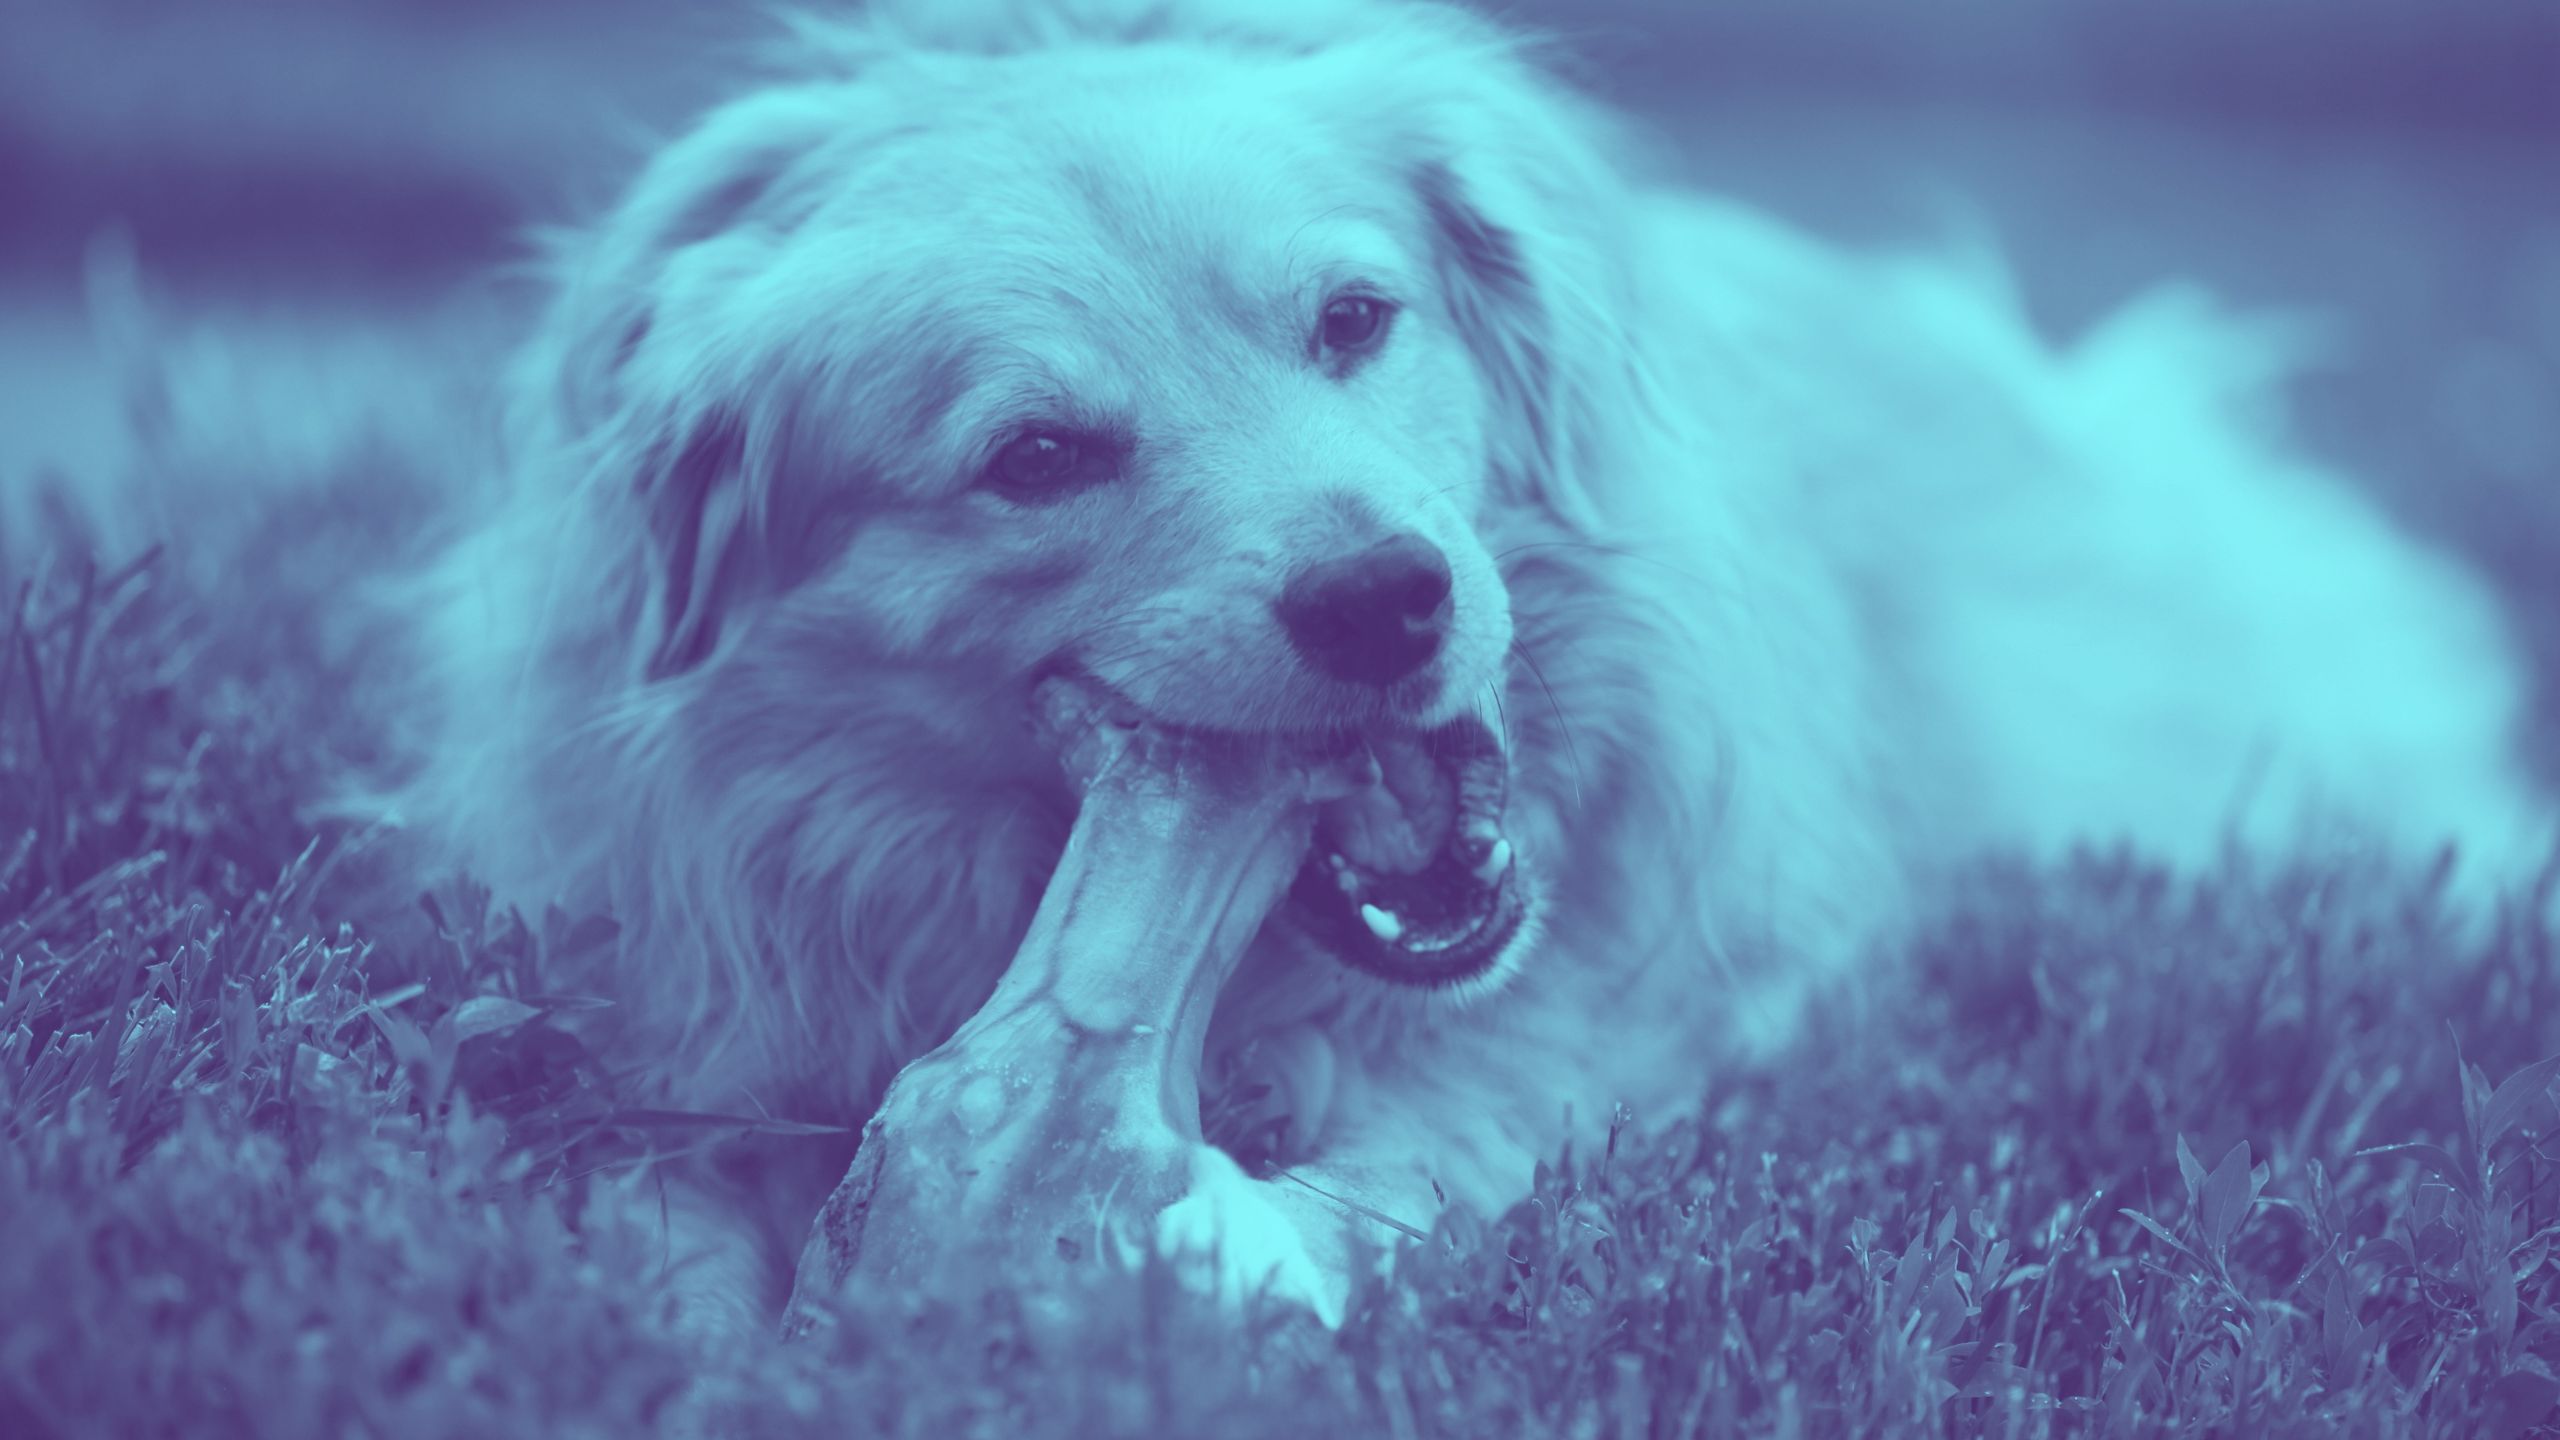 A dog chews on its bone or masticates on an enrichment activity if you want to use jargon